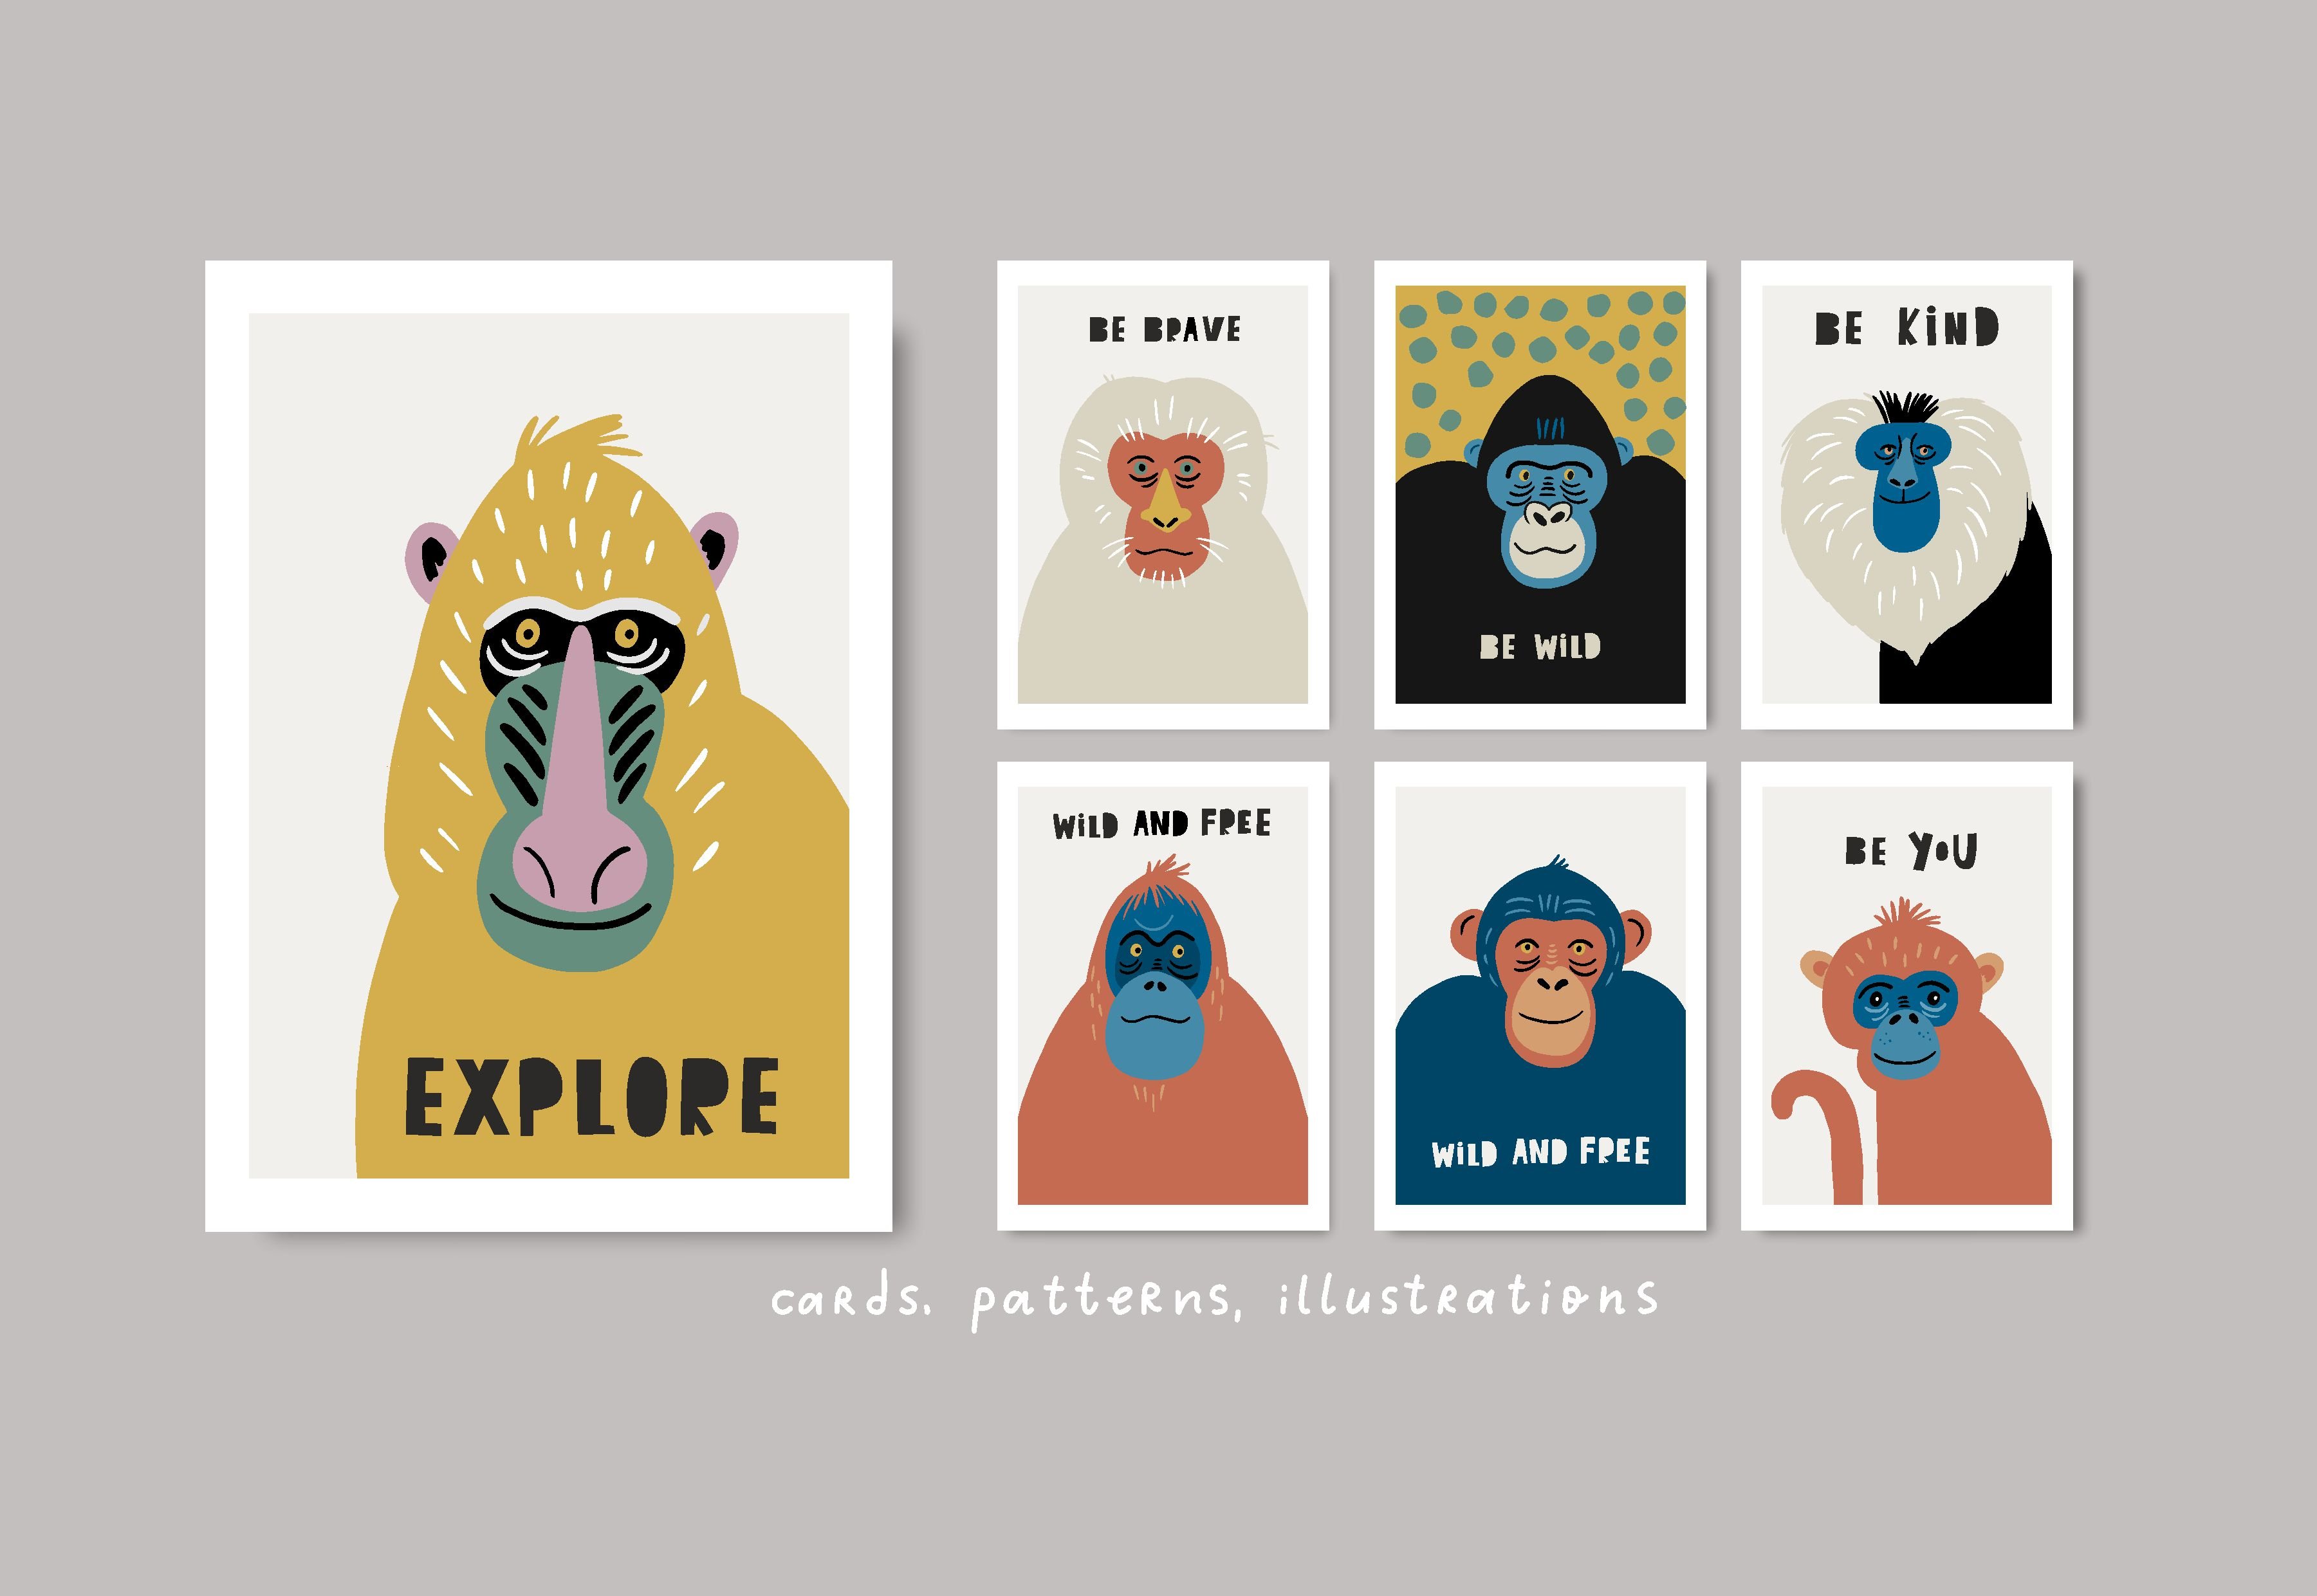 Be wild - Primates and monkeys cover image.